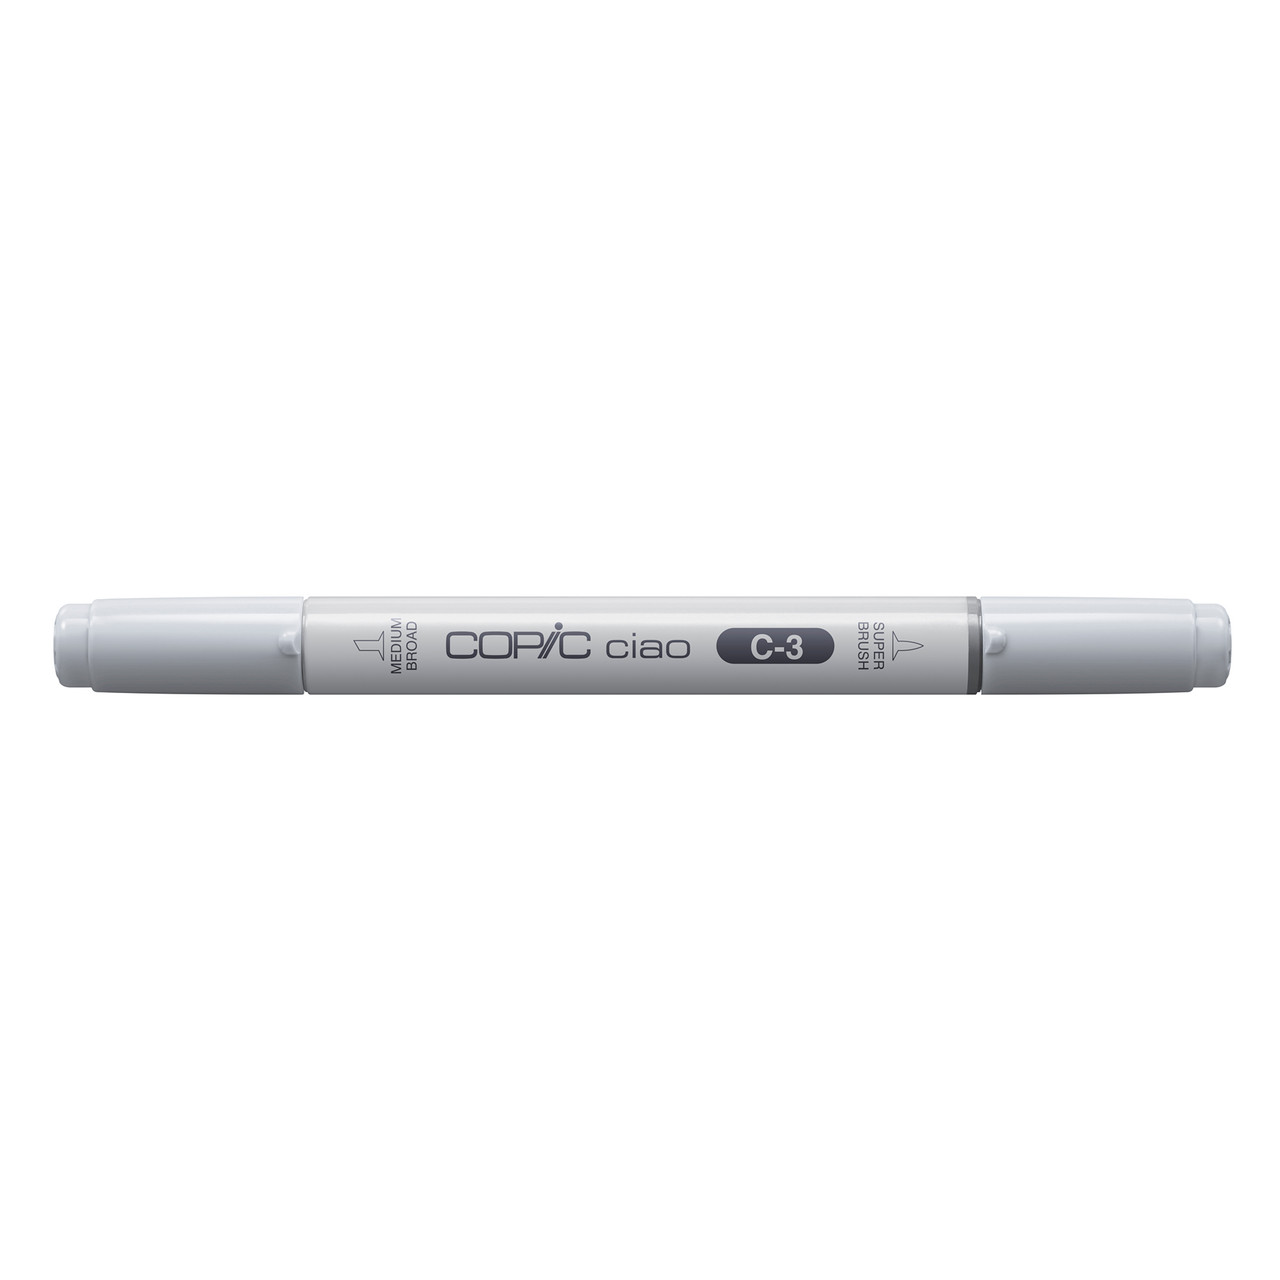 Copic Copic Ciao Marker Cool Gray No. 3 C-3 (One Size, Cool Grey No. 3 C3)